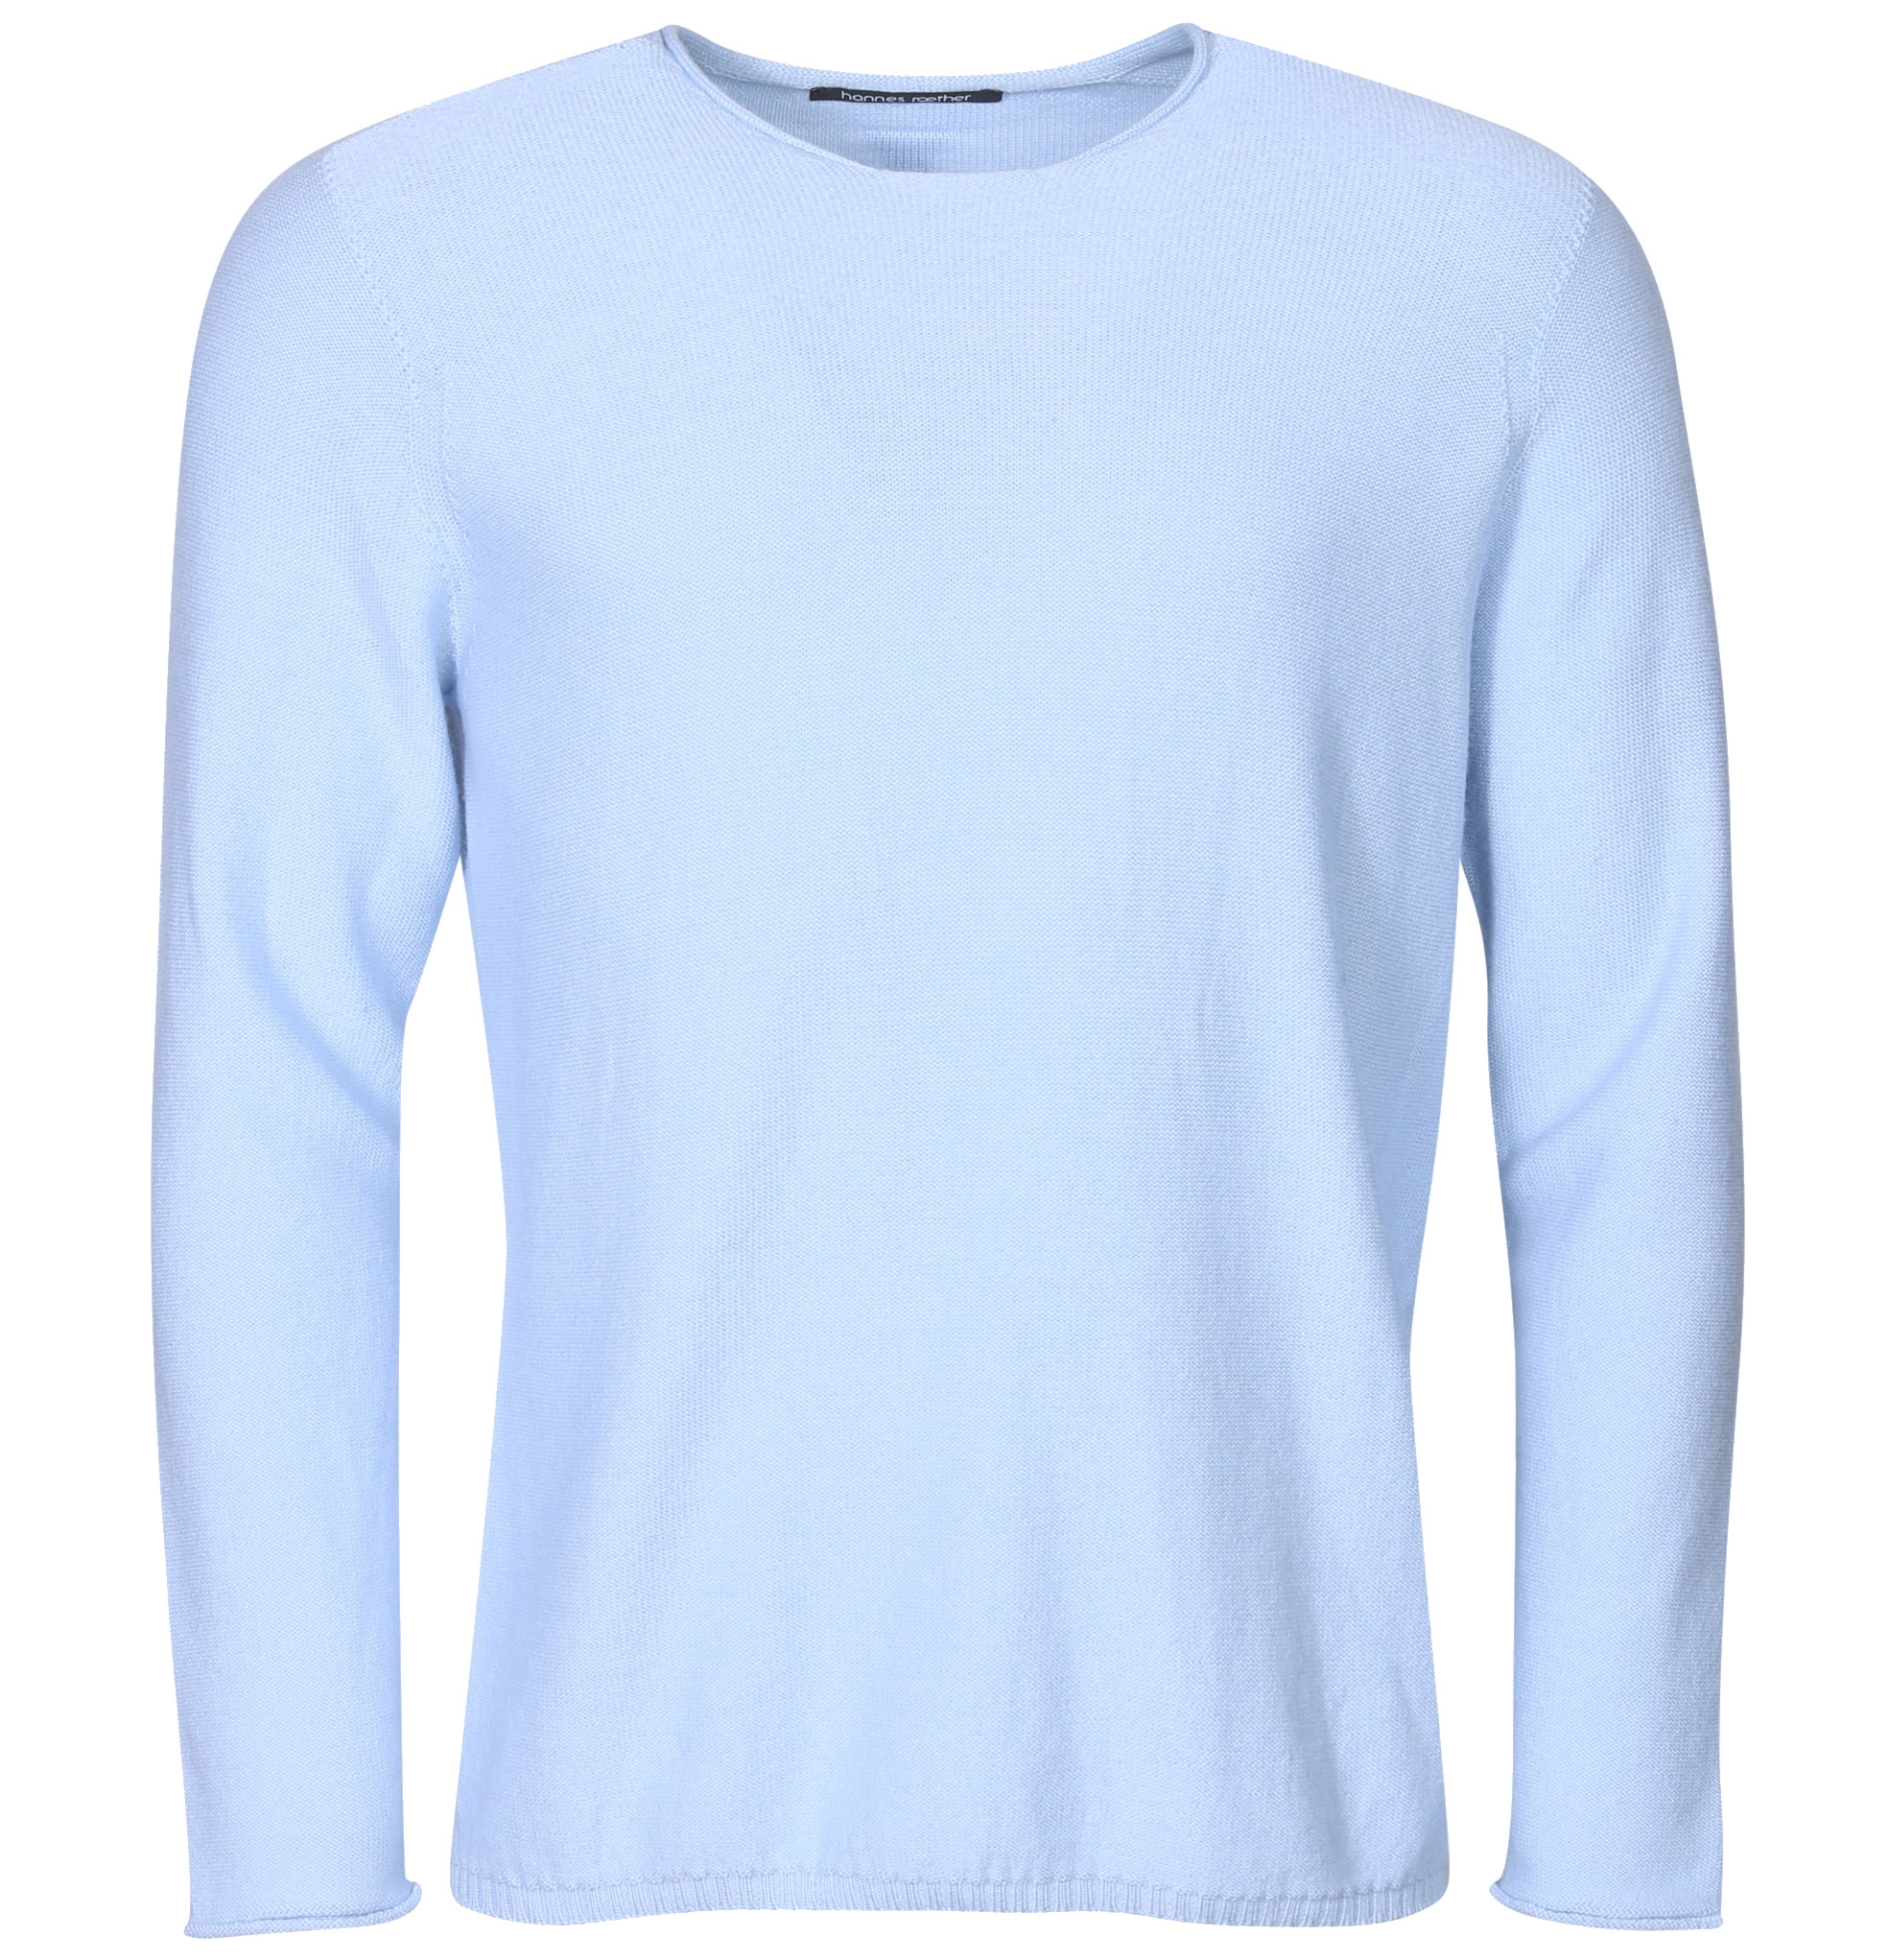 HANNES ROETHER Merino Knit Pullover in Light Blue L